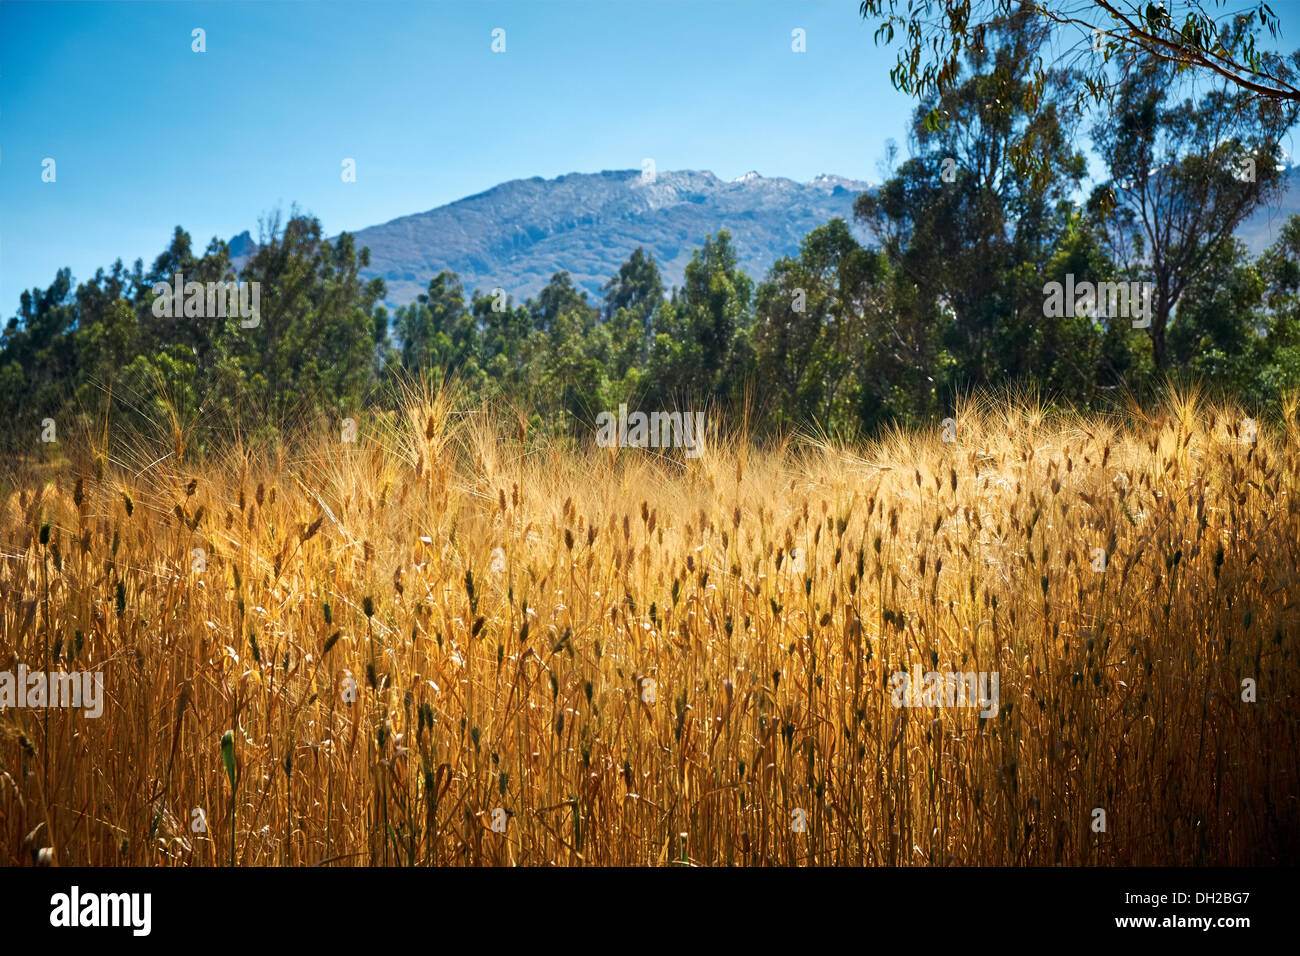 Golden brown wheat crop at a rural settlement in the Peruvian Andes, South America. Stock Photo